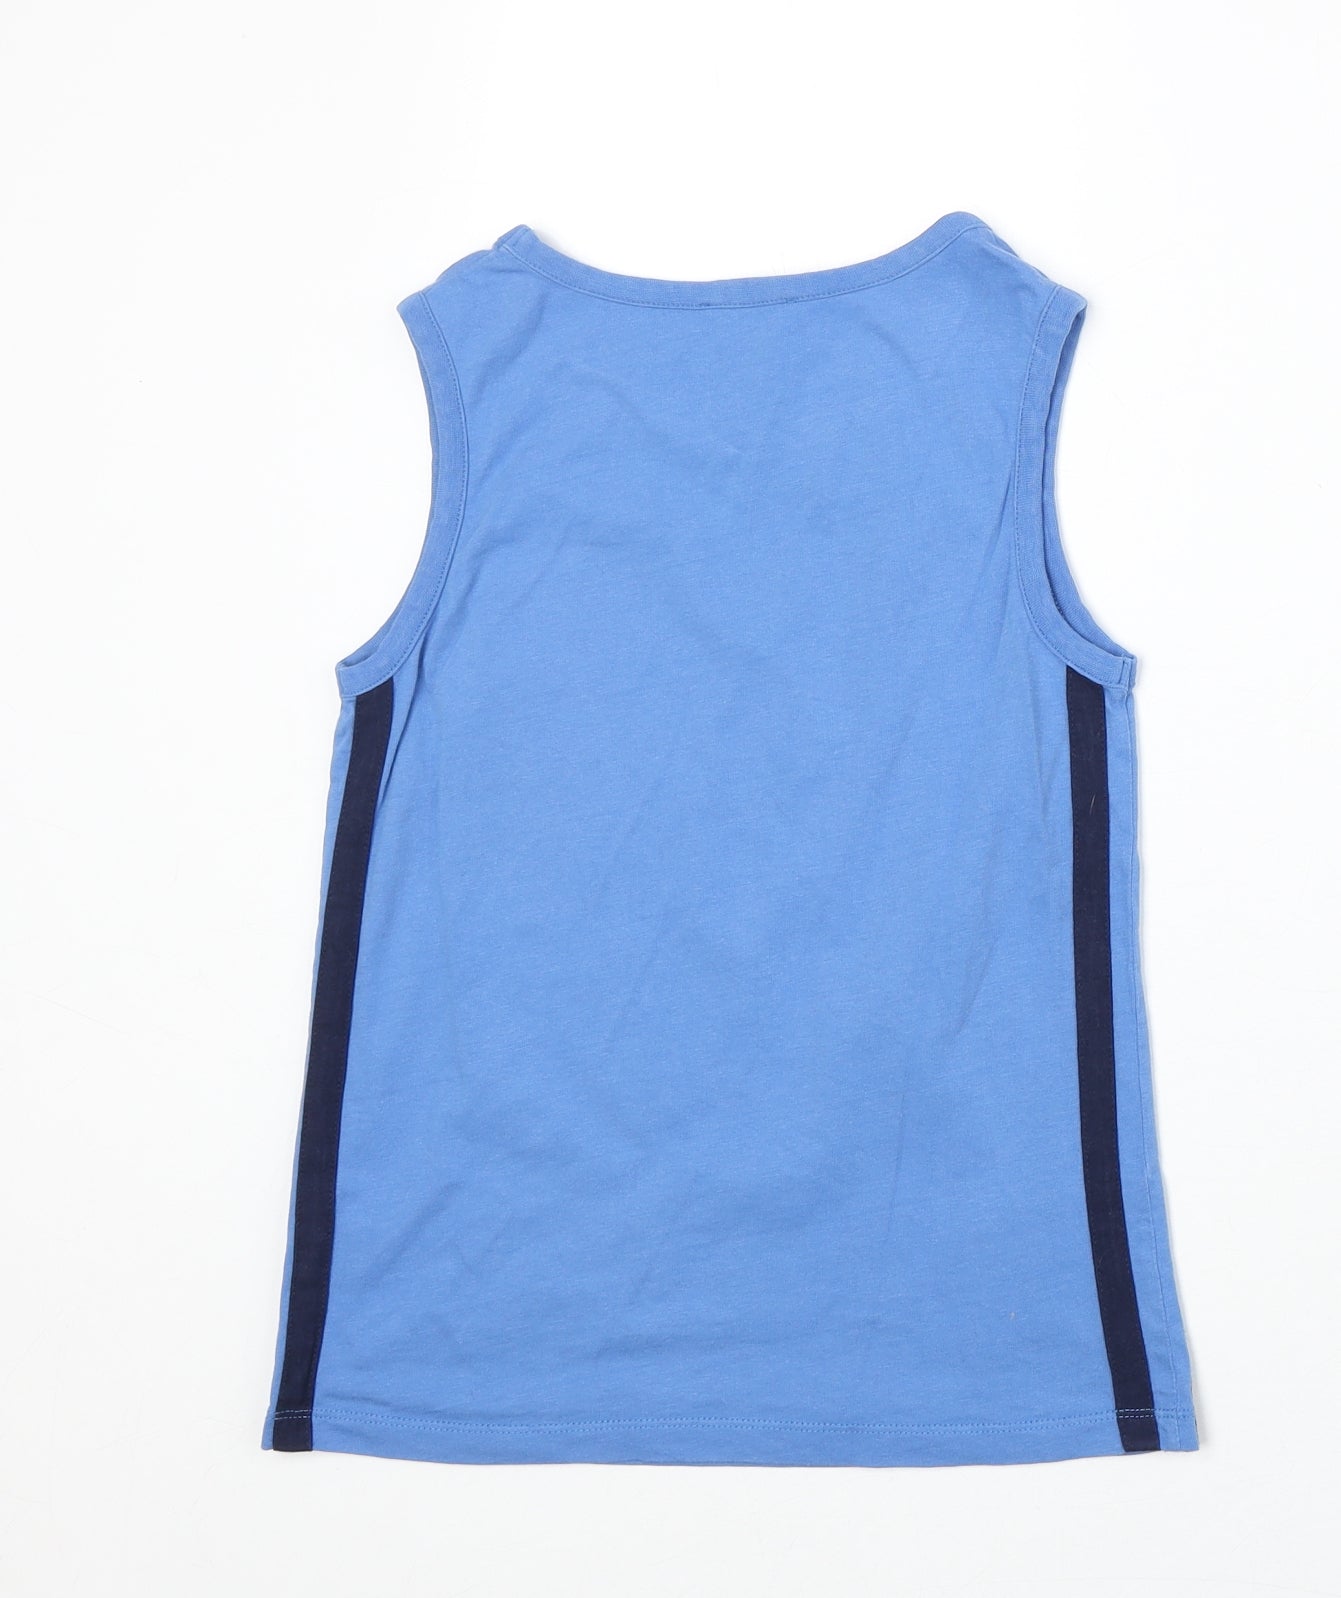 Blue Zoo Boys Blue 100% Cotton Basic Tank Size 7-8 Years Round Neck Pullover